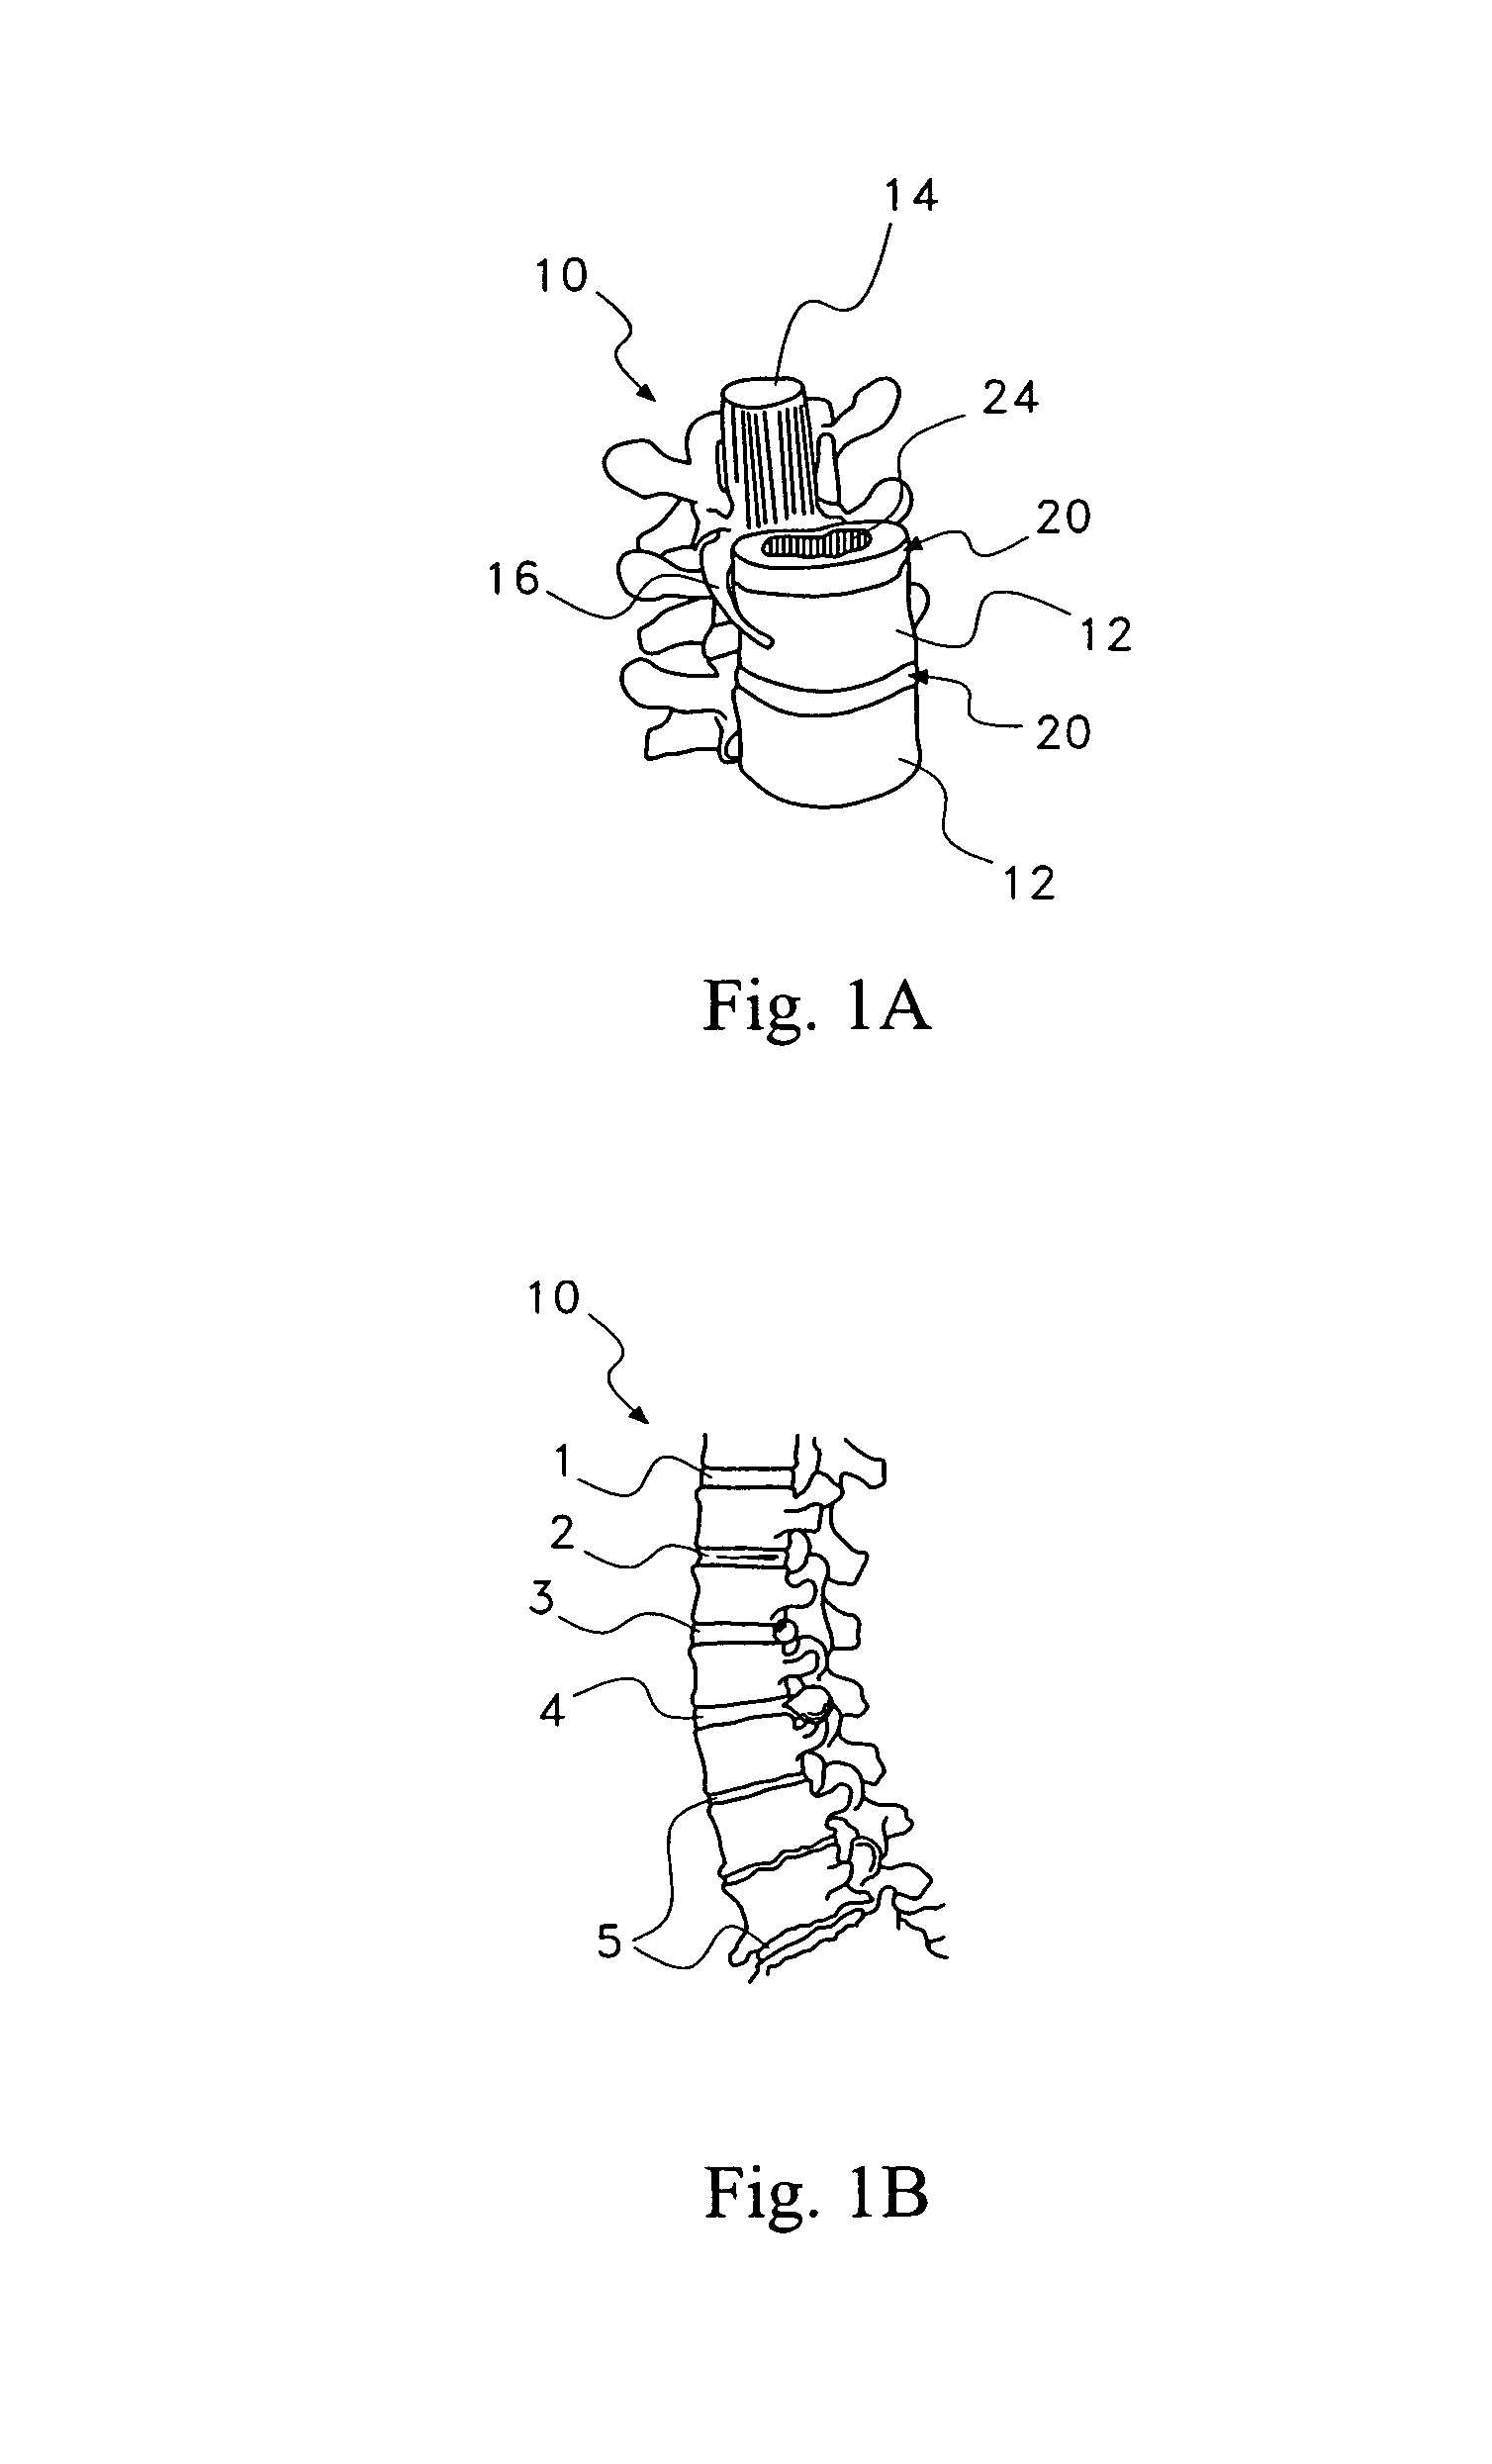 Pharmaceutical removal of neuronal extensions from a degenerating disc